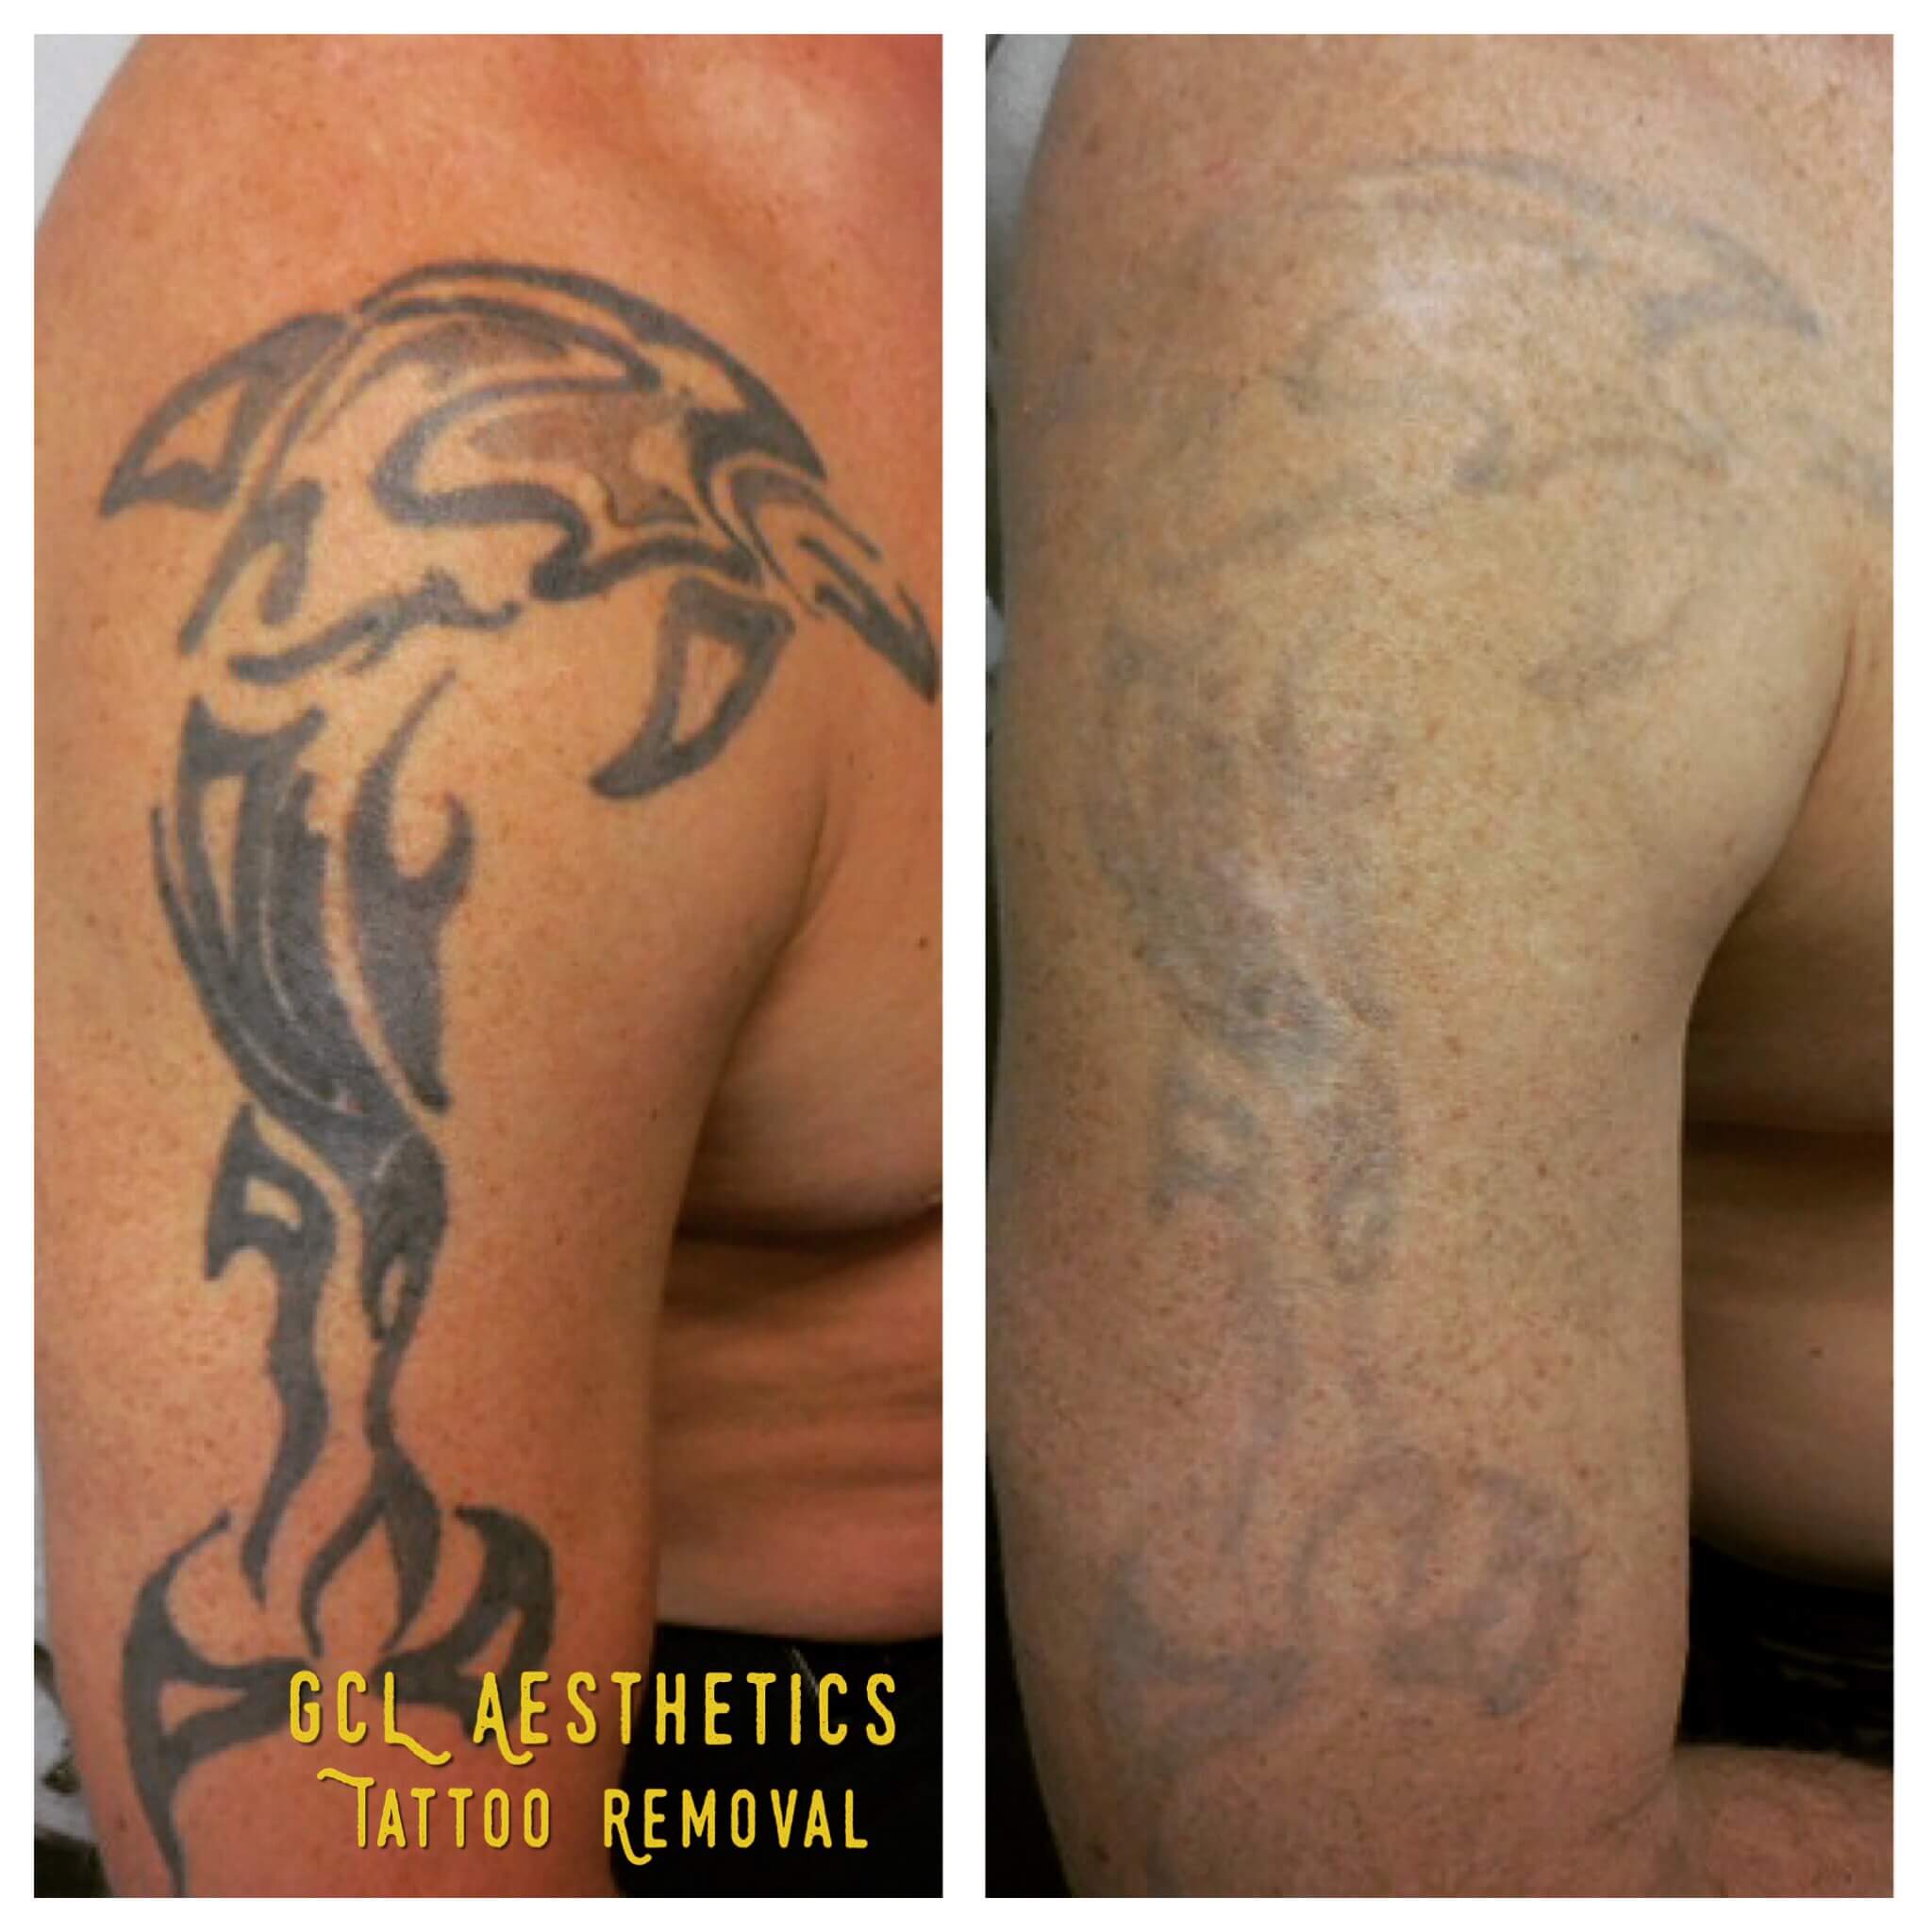 Does Laser Tattoo Removal Leave Scars